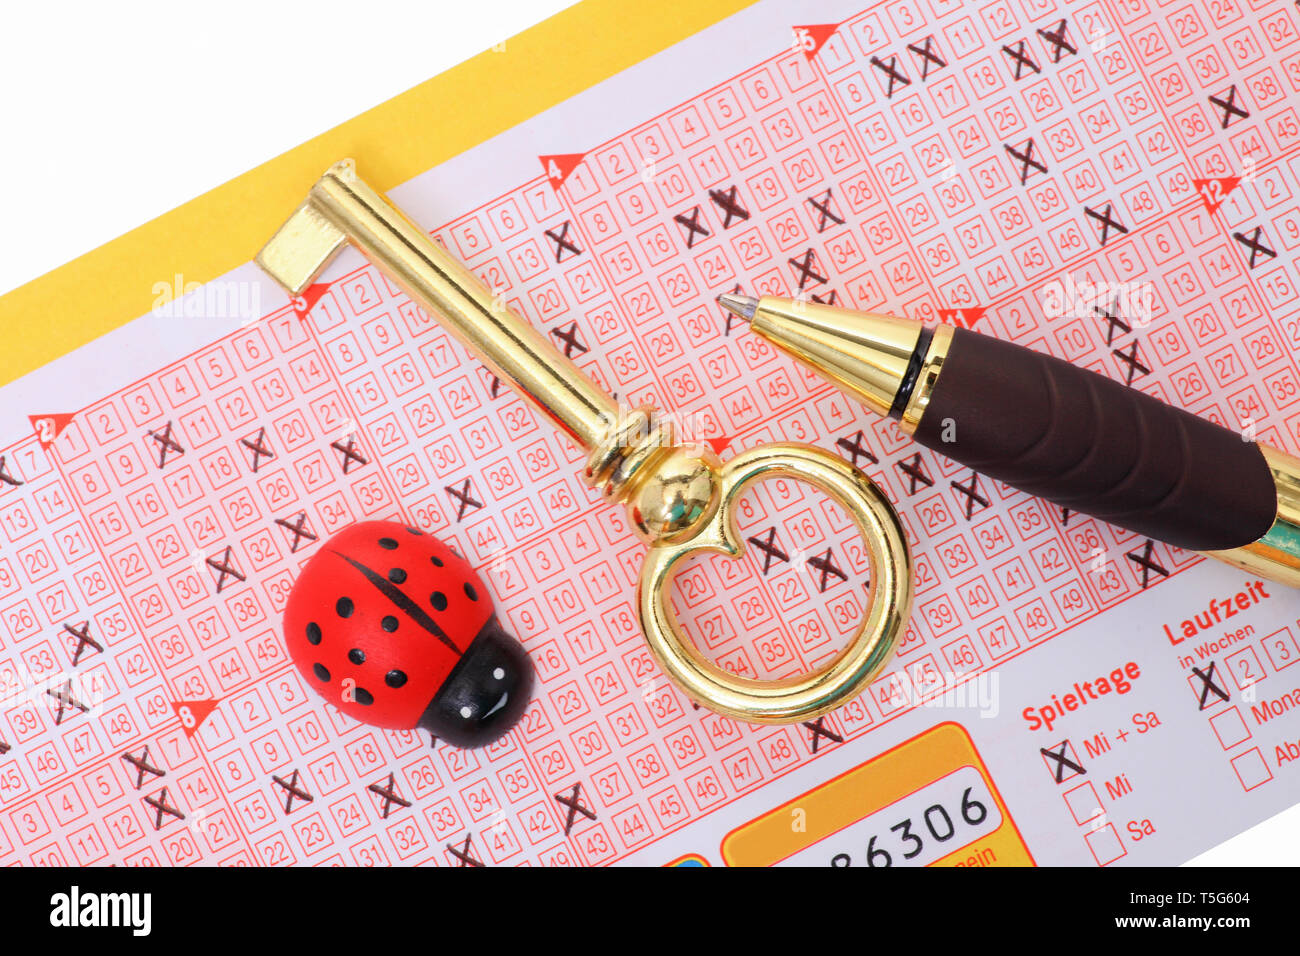 Lottery - A filled lottery ticket with pen and luck symbols. Stock Photo